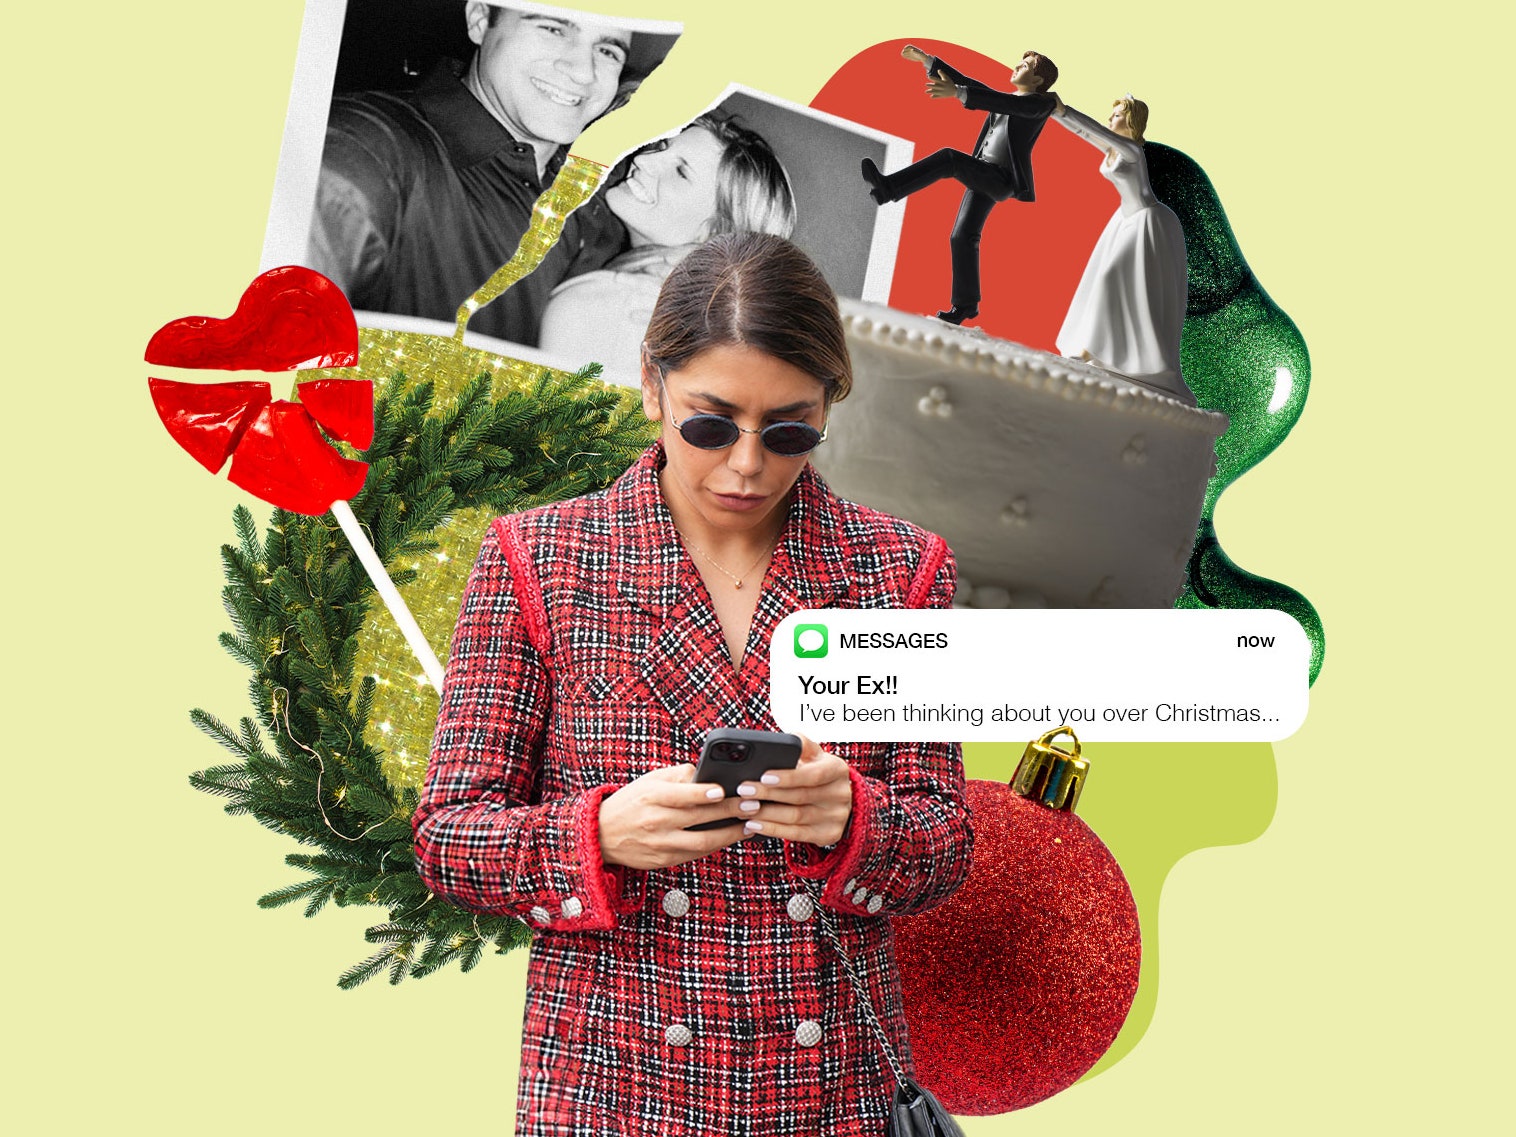 Here's Why You Want to Text Your Ex at Christmas